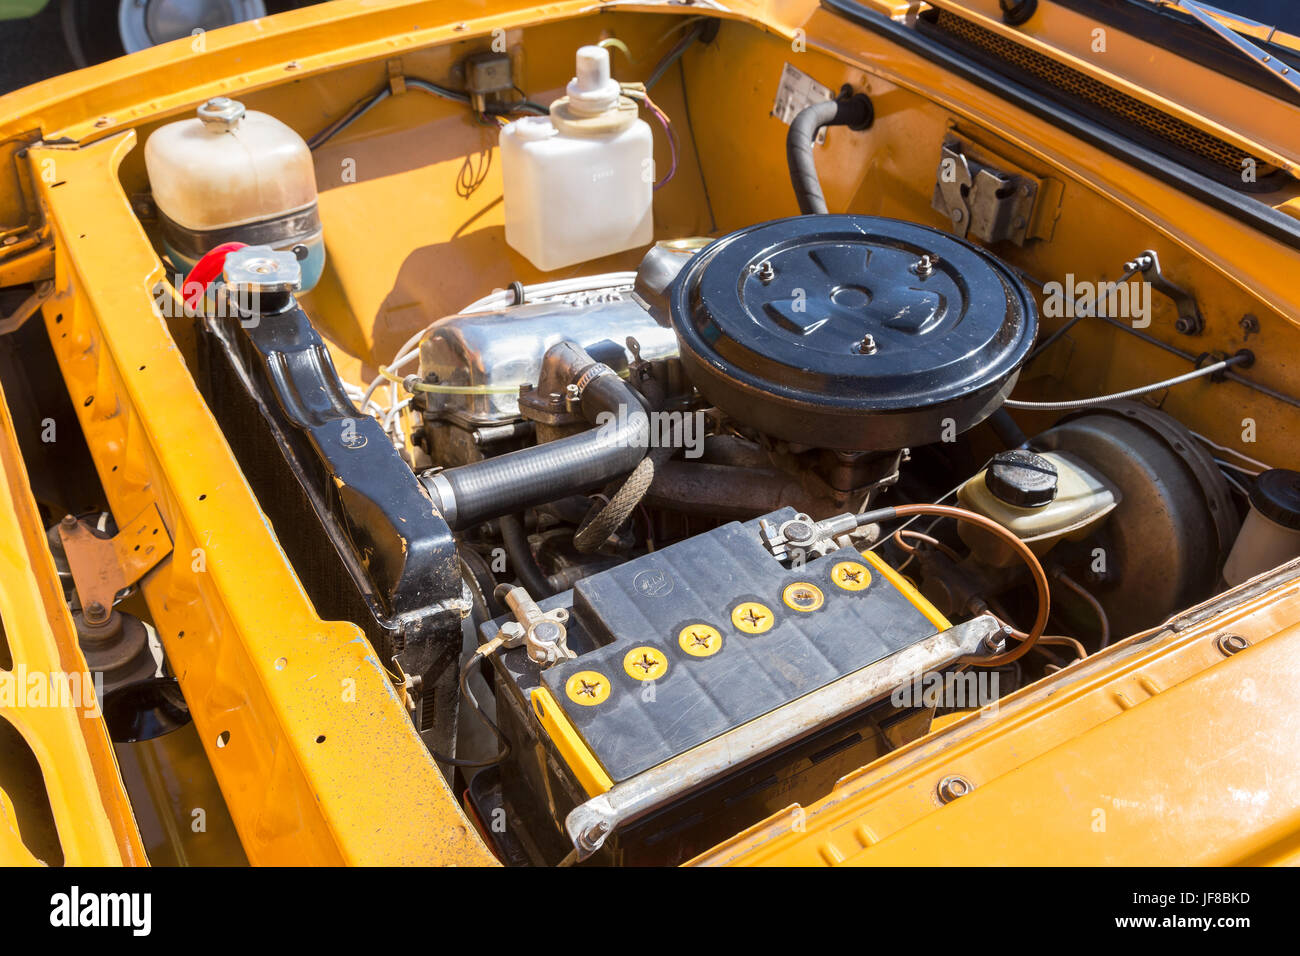 Samara, Russia - May 1, 2017: Car engine of old soviet vehicle Moskvich-412, under the hood of a retro russian car Stock Photo